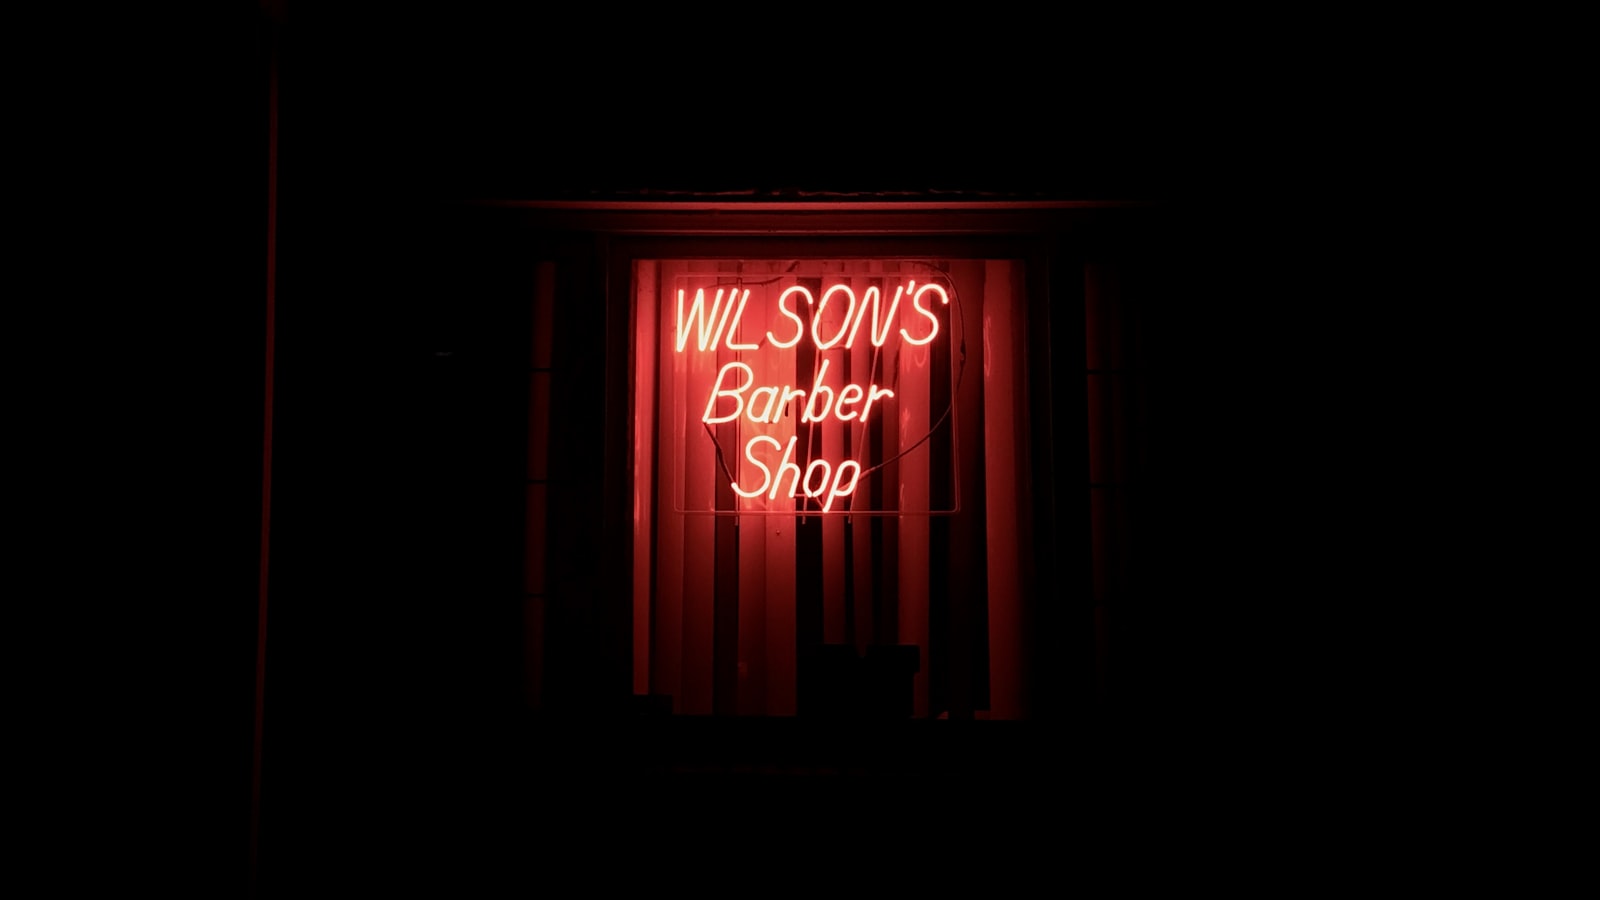 iPhone 7 Plus back iSight Duo camera 3.99mm f/1.8 sample photo. Wilson's barber shop lighted photography